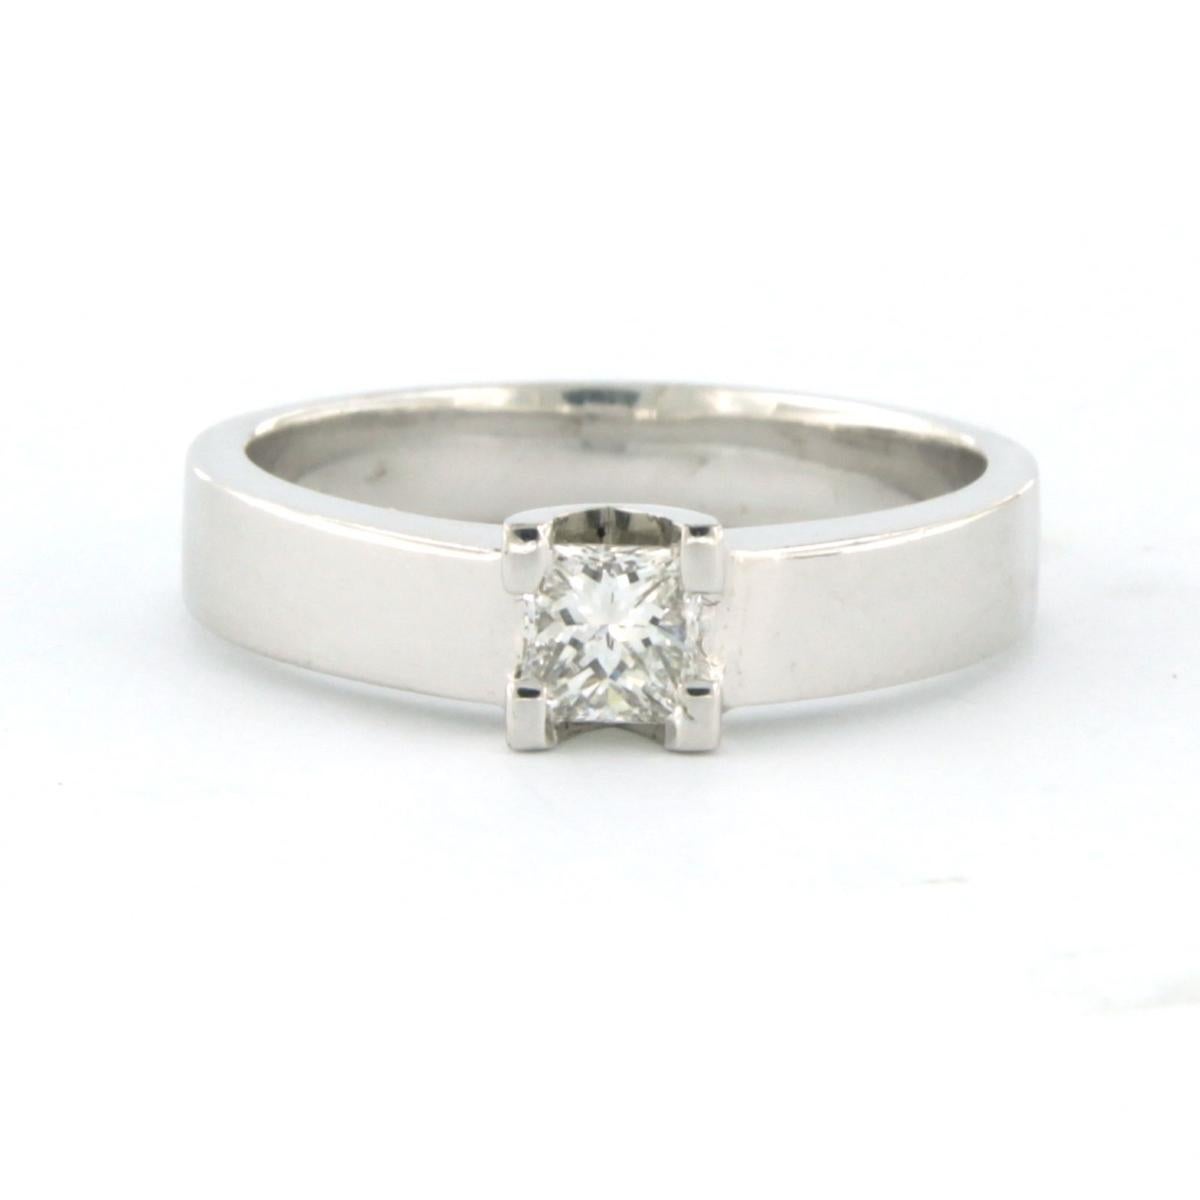 18k white gold solitaire ring set with a princess cut diamond. 0.37ct - G/H - VS/SI - ring size U.S. 6 - EU. 16.5(52)

detailed description:

the front of the ring is 5.1 mm wide

weight: 5.0 grams

ring size US 6 - EU. 16.5(52), ring can be